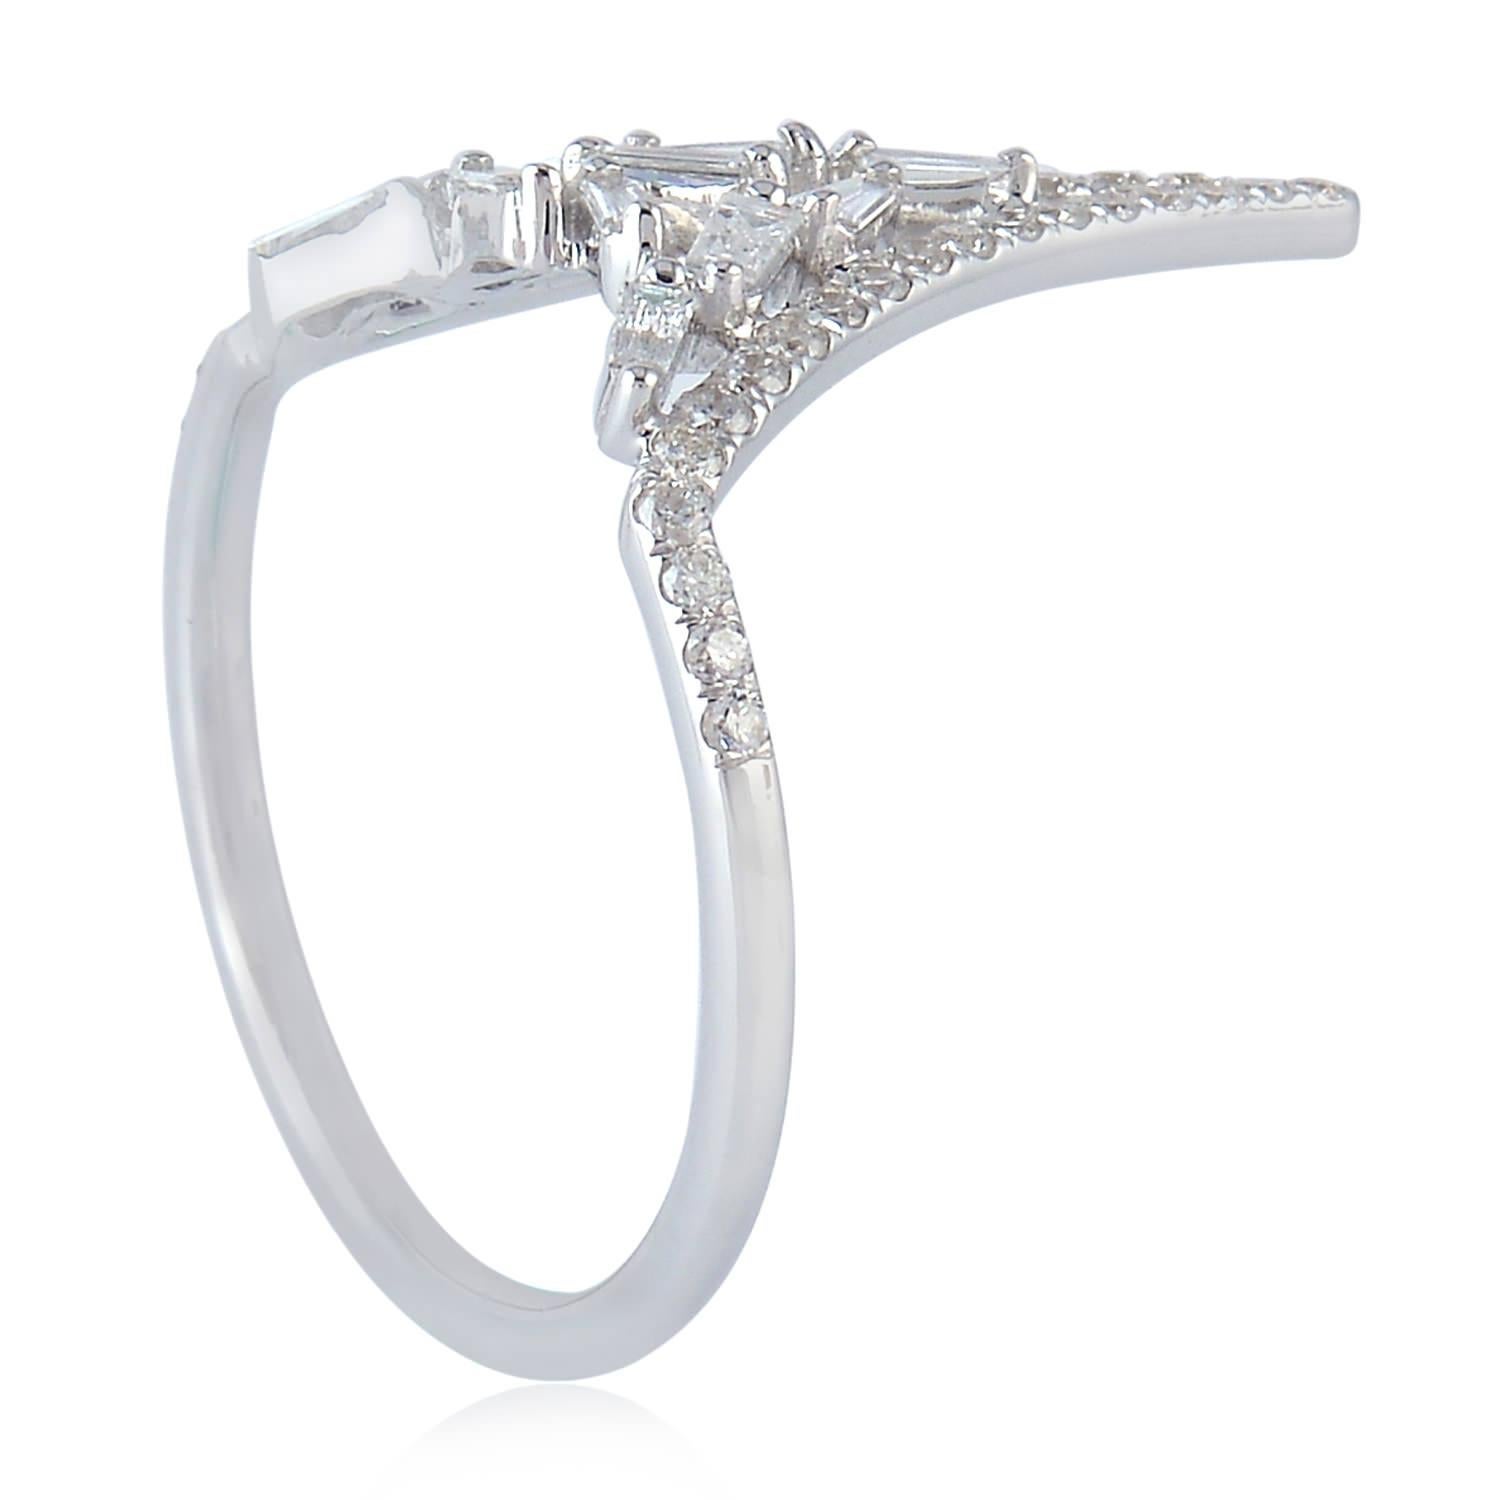 Mixed Cut V Shaped Geometric Diamond Ring Made In 18k White Gold For Sale